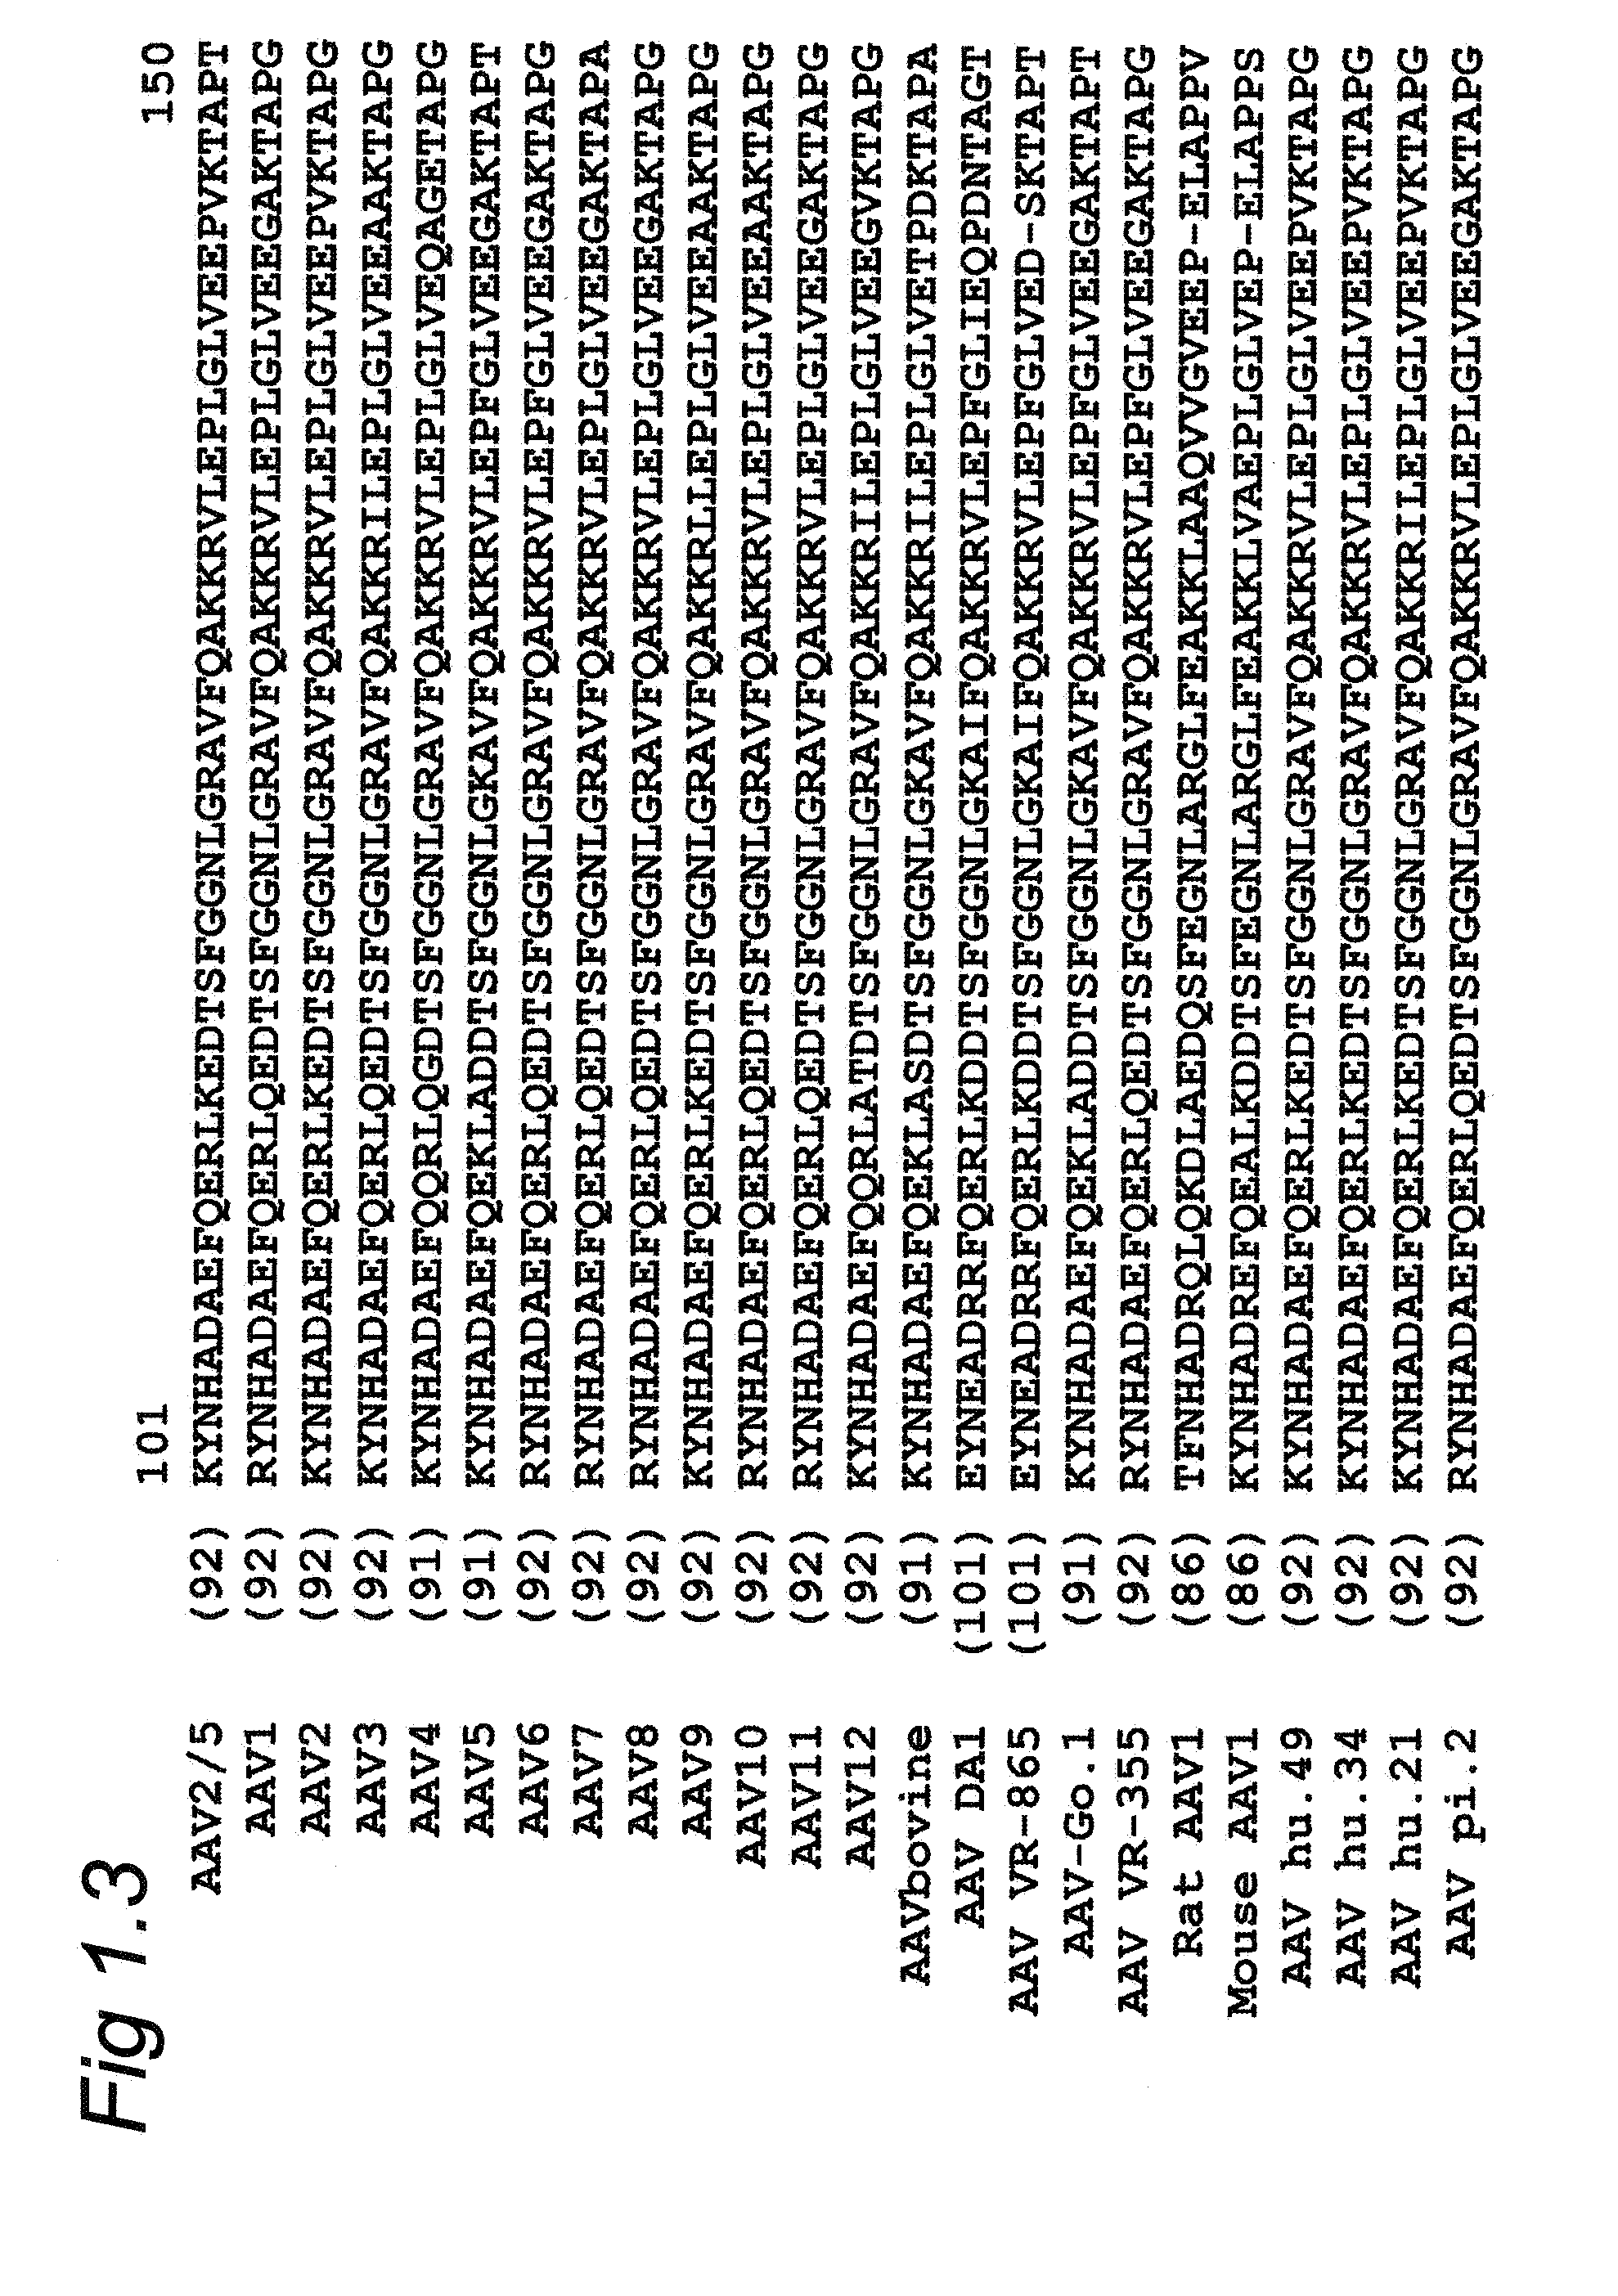 Parvoviral capsid with incorporated gly-ala repeat region